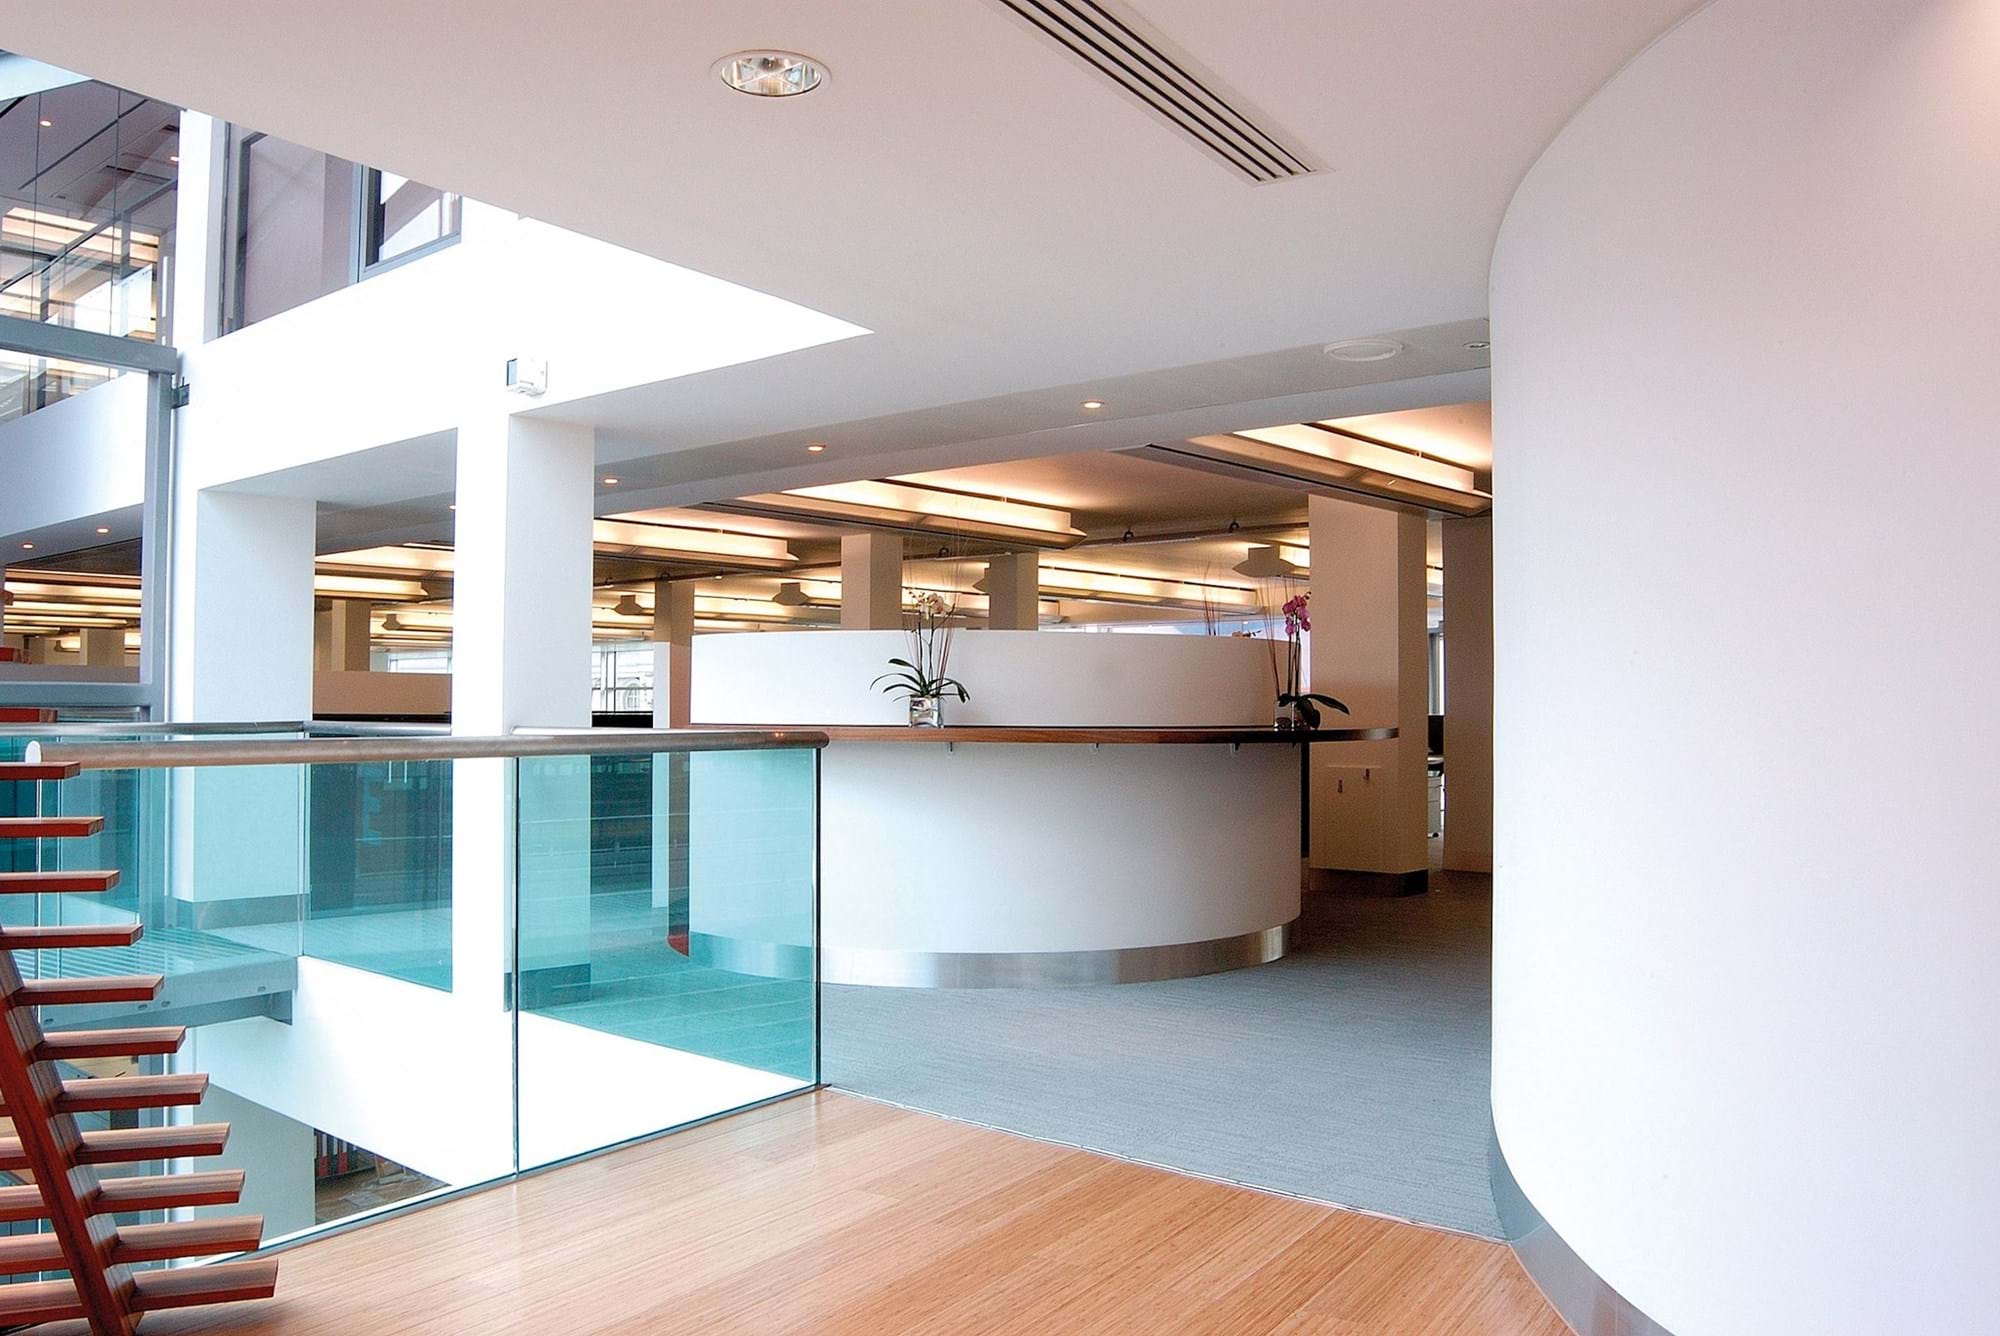 Modus Workspace office design, fit out and refurbishment - Capita Symonds - Special Features - Capita-(12).jpg